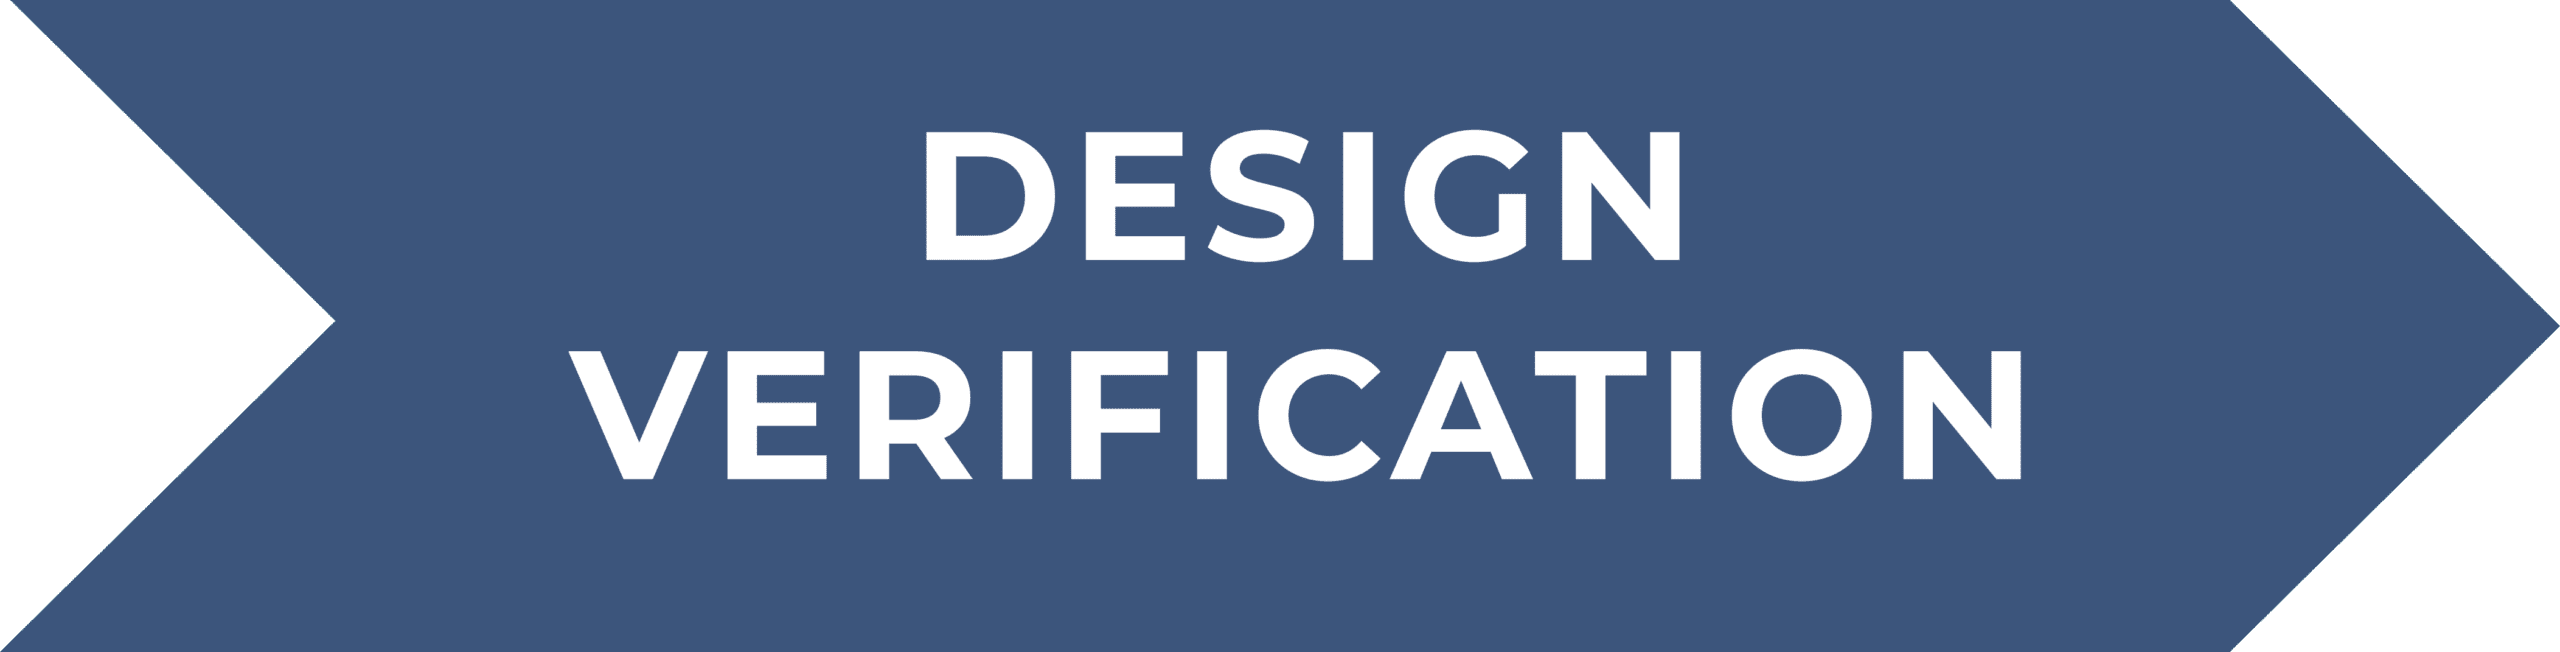 Graphic with Text "Design Verification"